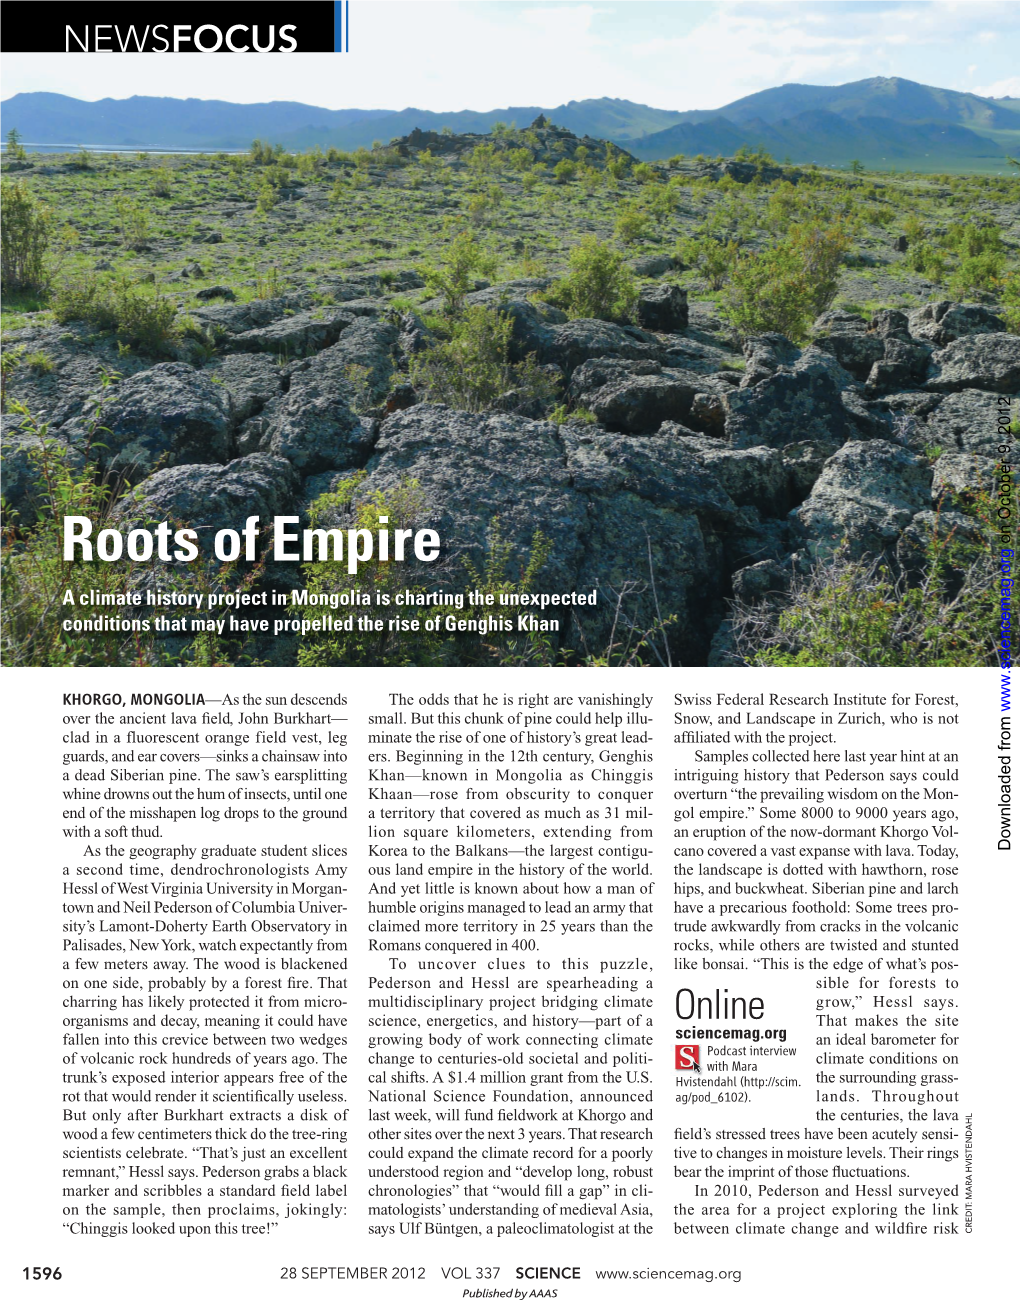 Roots of Empire on October 9, 2012 a Climate History Project in Mongolia Is Charting the Unexpected Conditions That May Have Propelled the Rise of Genghis Khan